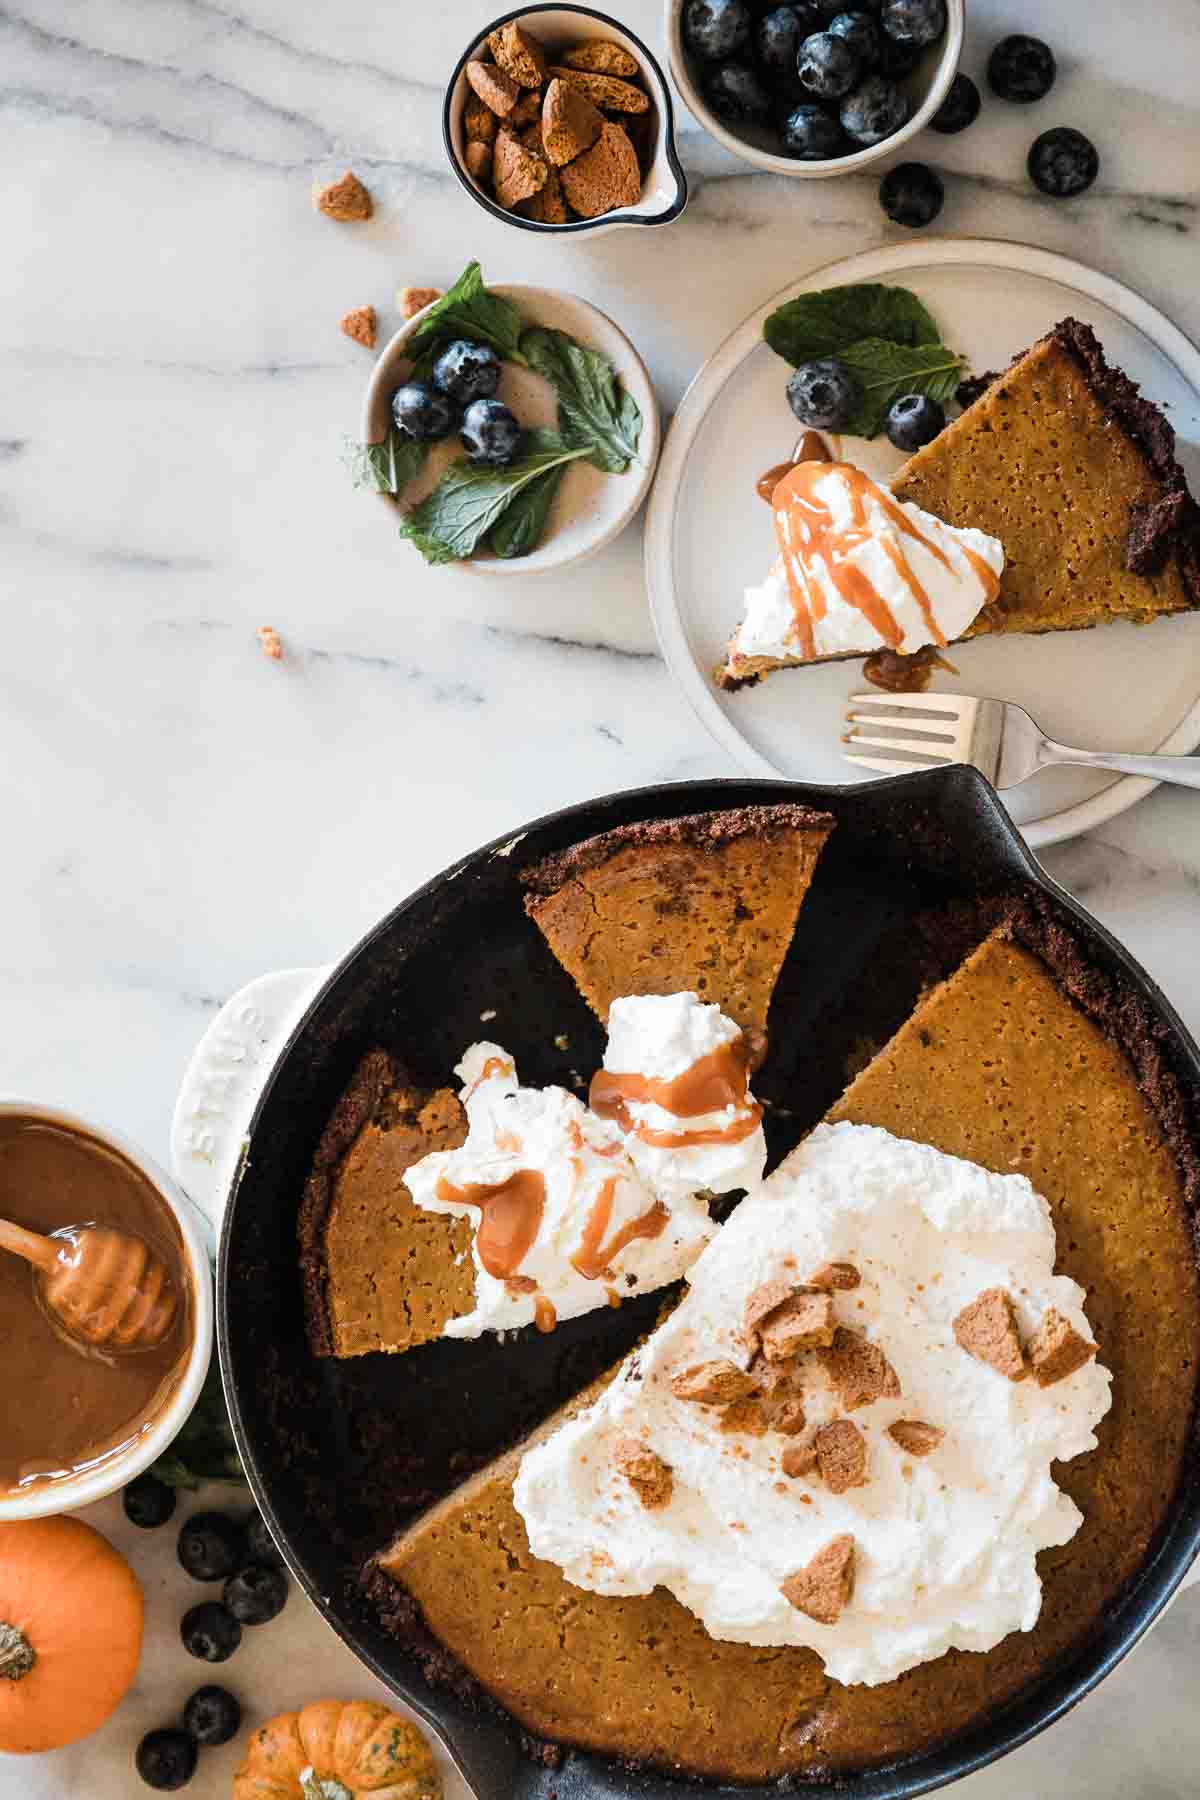 Easy pumpkin pie in a cast iron skillet. There are small bowls of blueberries, cookies, mint, and caramel to the side.